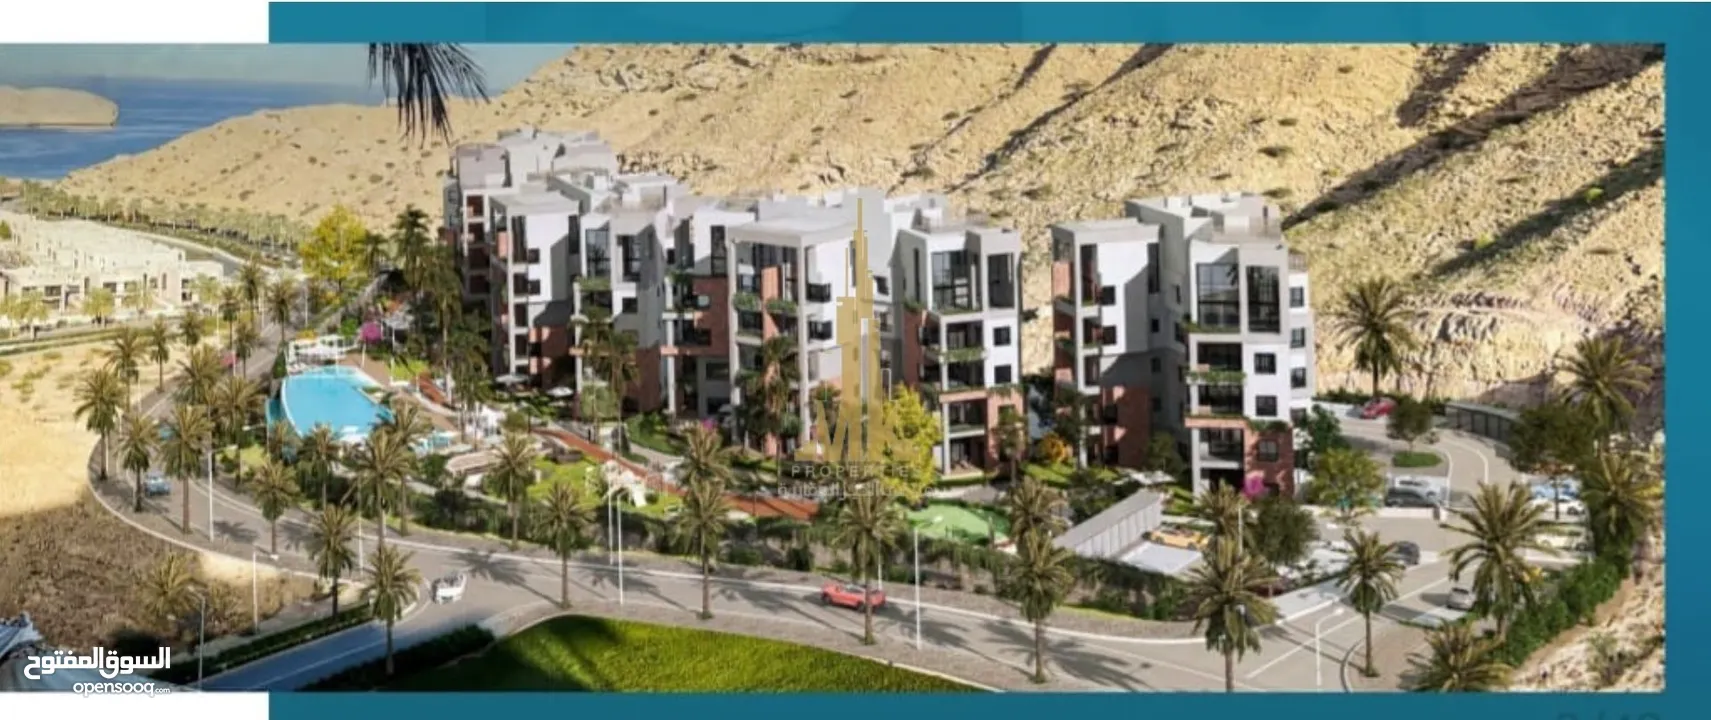 Own your apartment in Muscat bay/ Studio/ Own garden/ Down payment 10%/ Freehold/ Lifetime residency